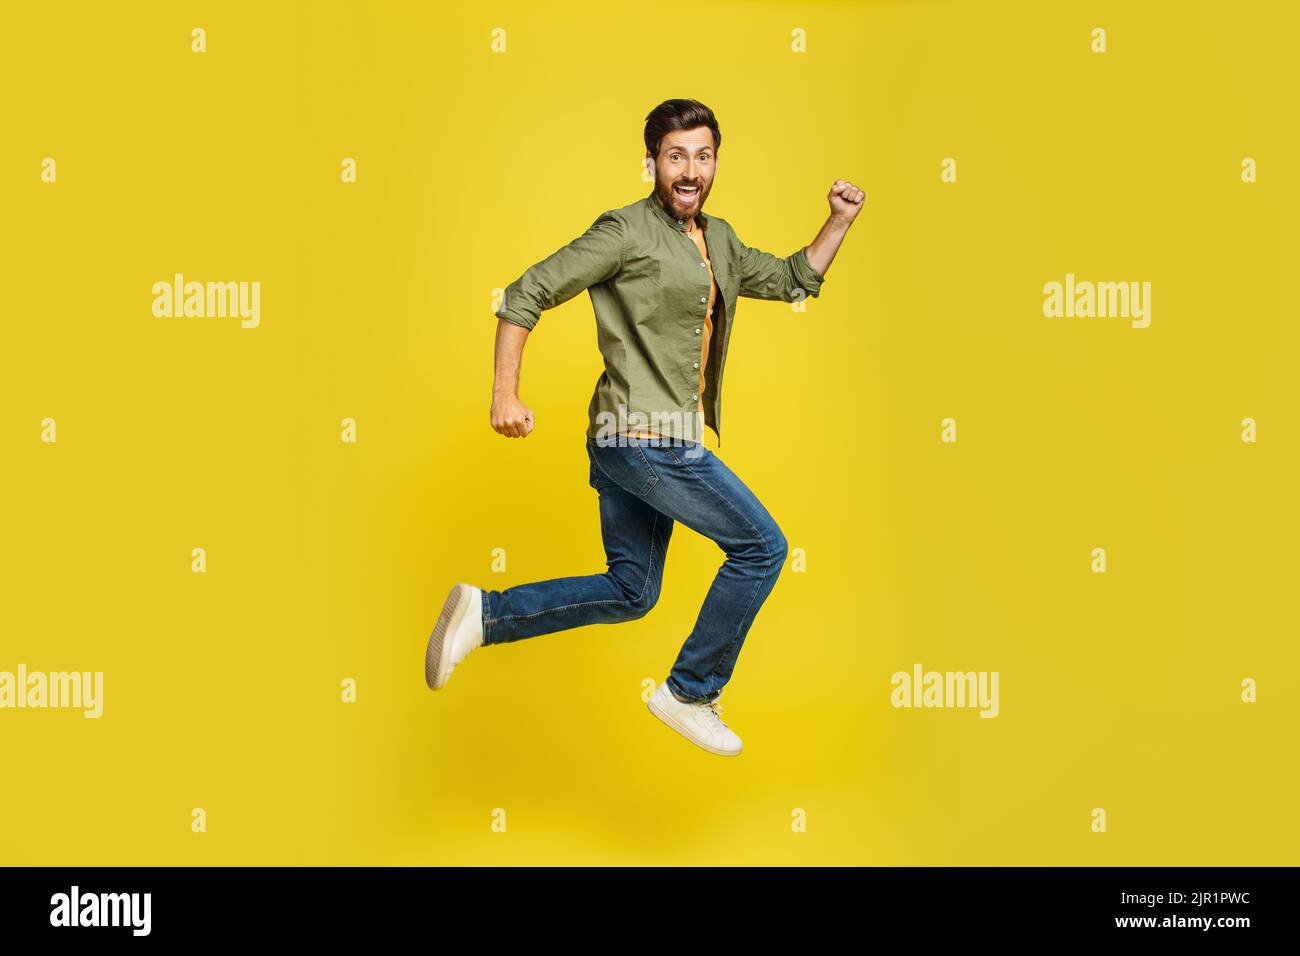 Portrait of middle aged man running over yellow background, side view shot of joyful male jumping in air Stock Photo